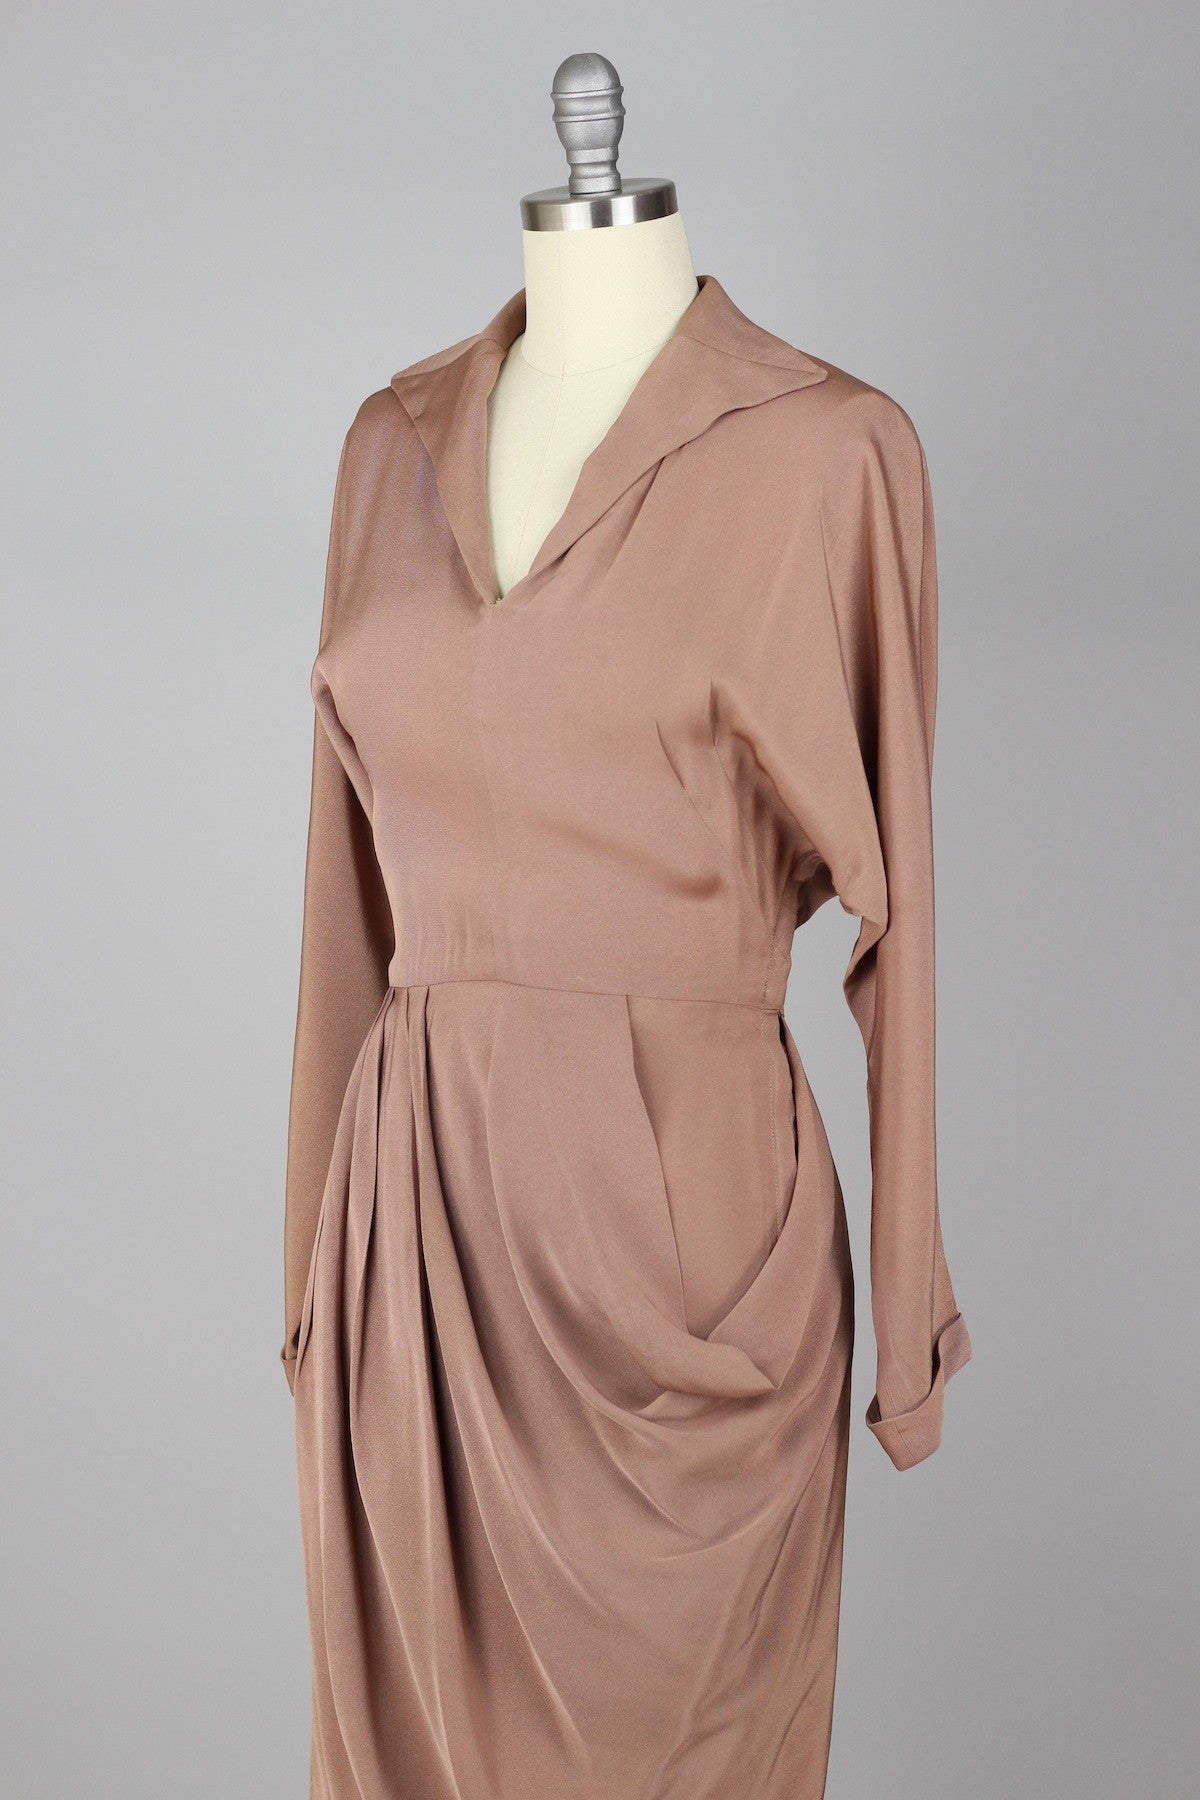 Exquisite 1940s to 1950s Rose Taupe Draped Rayon Crepe Cocktail Dress